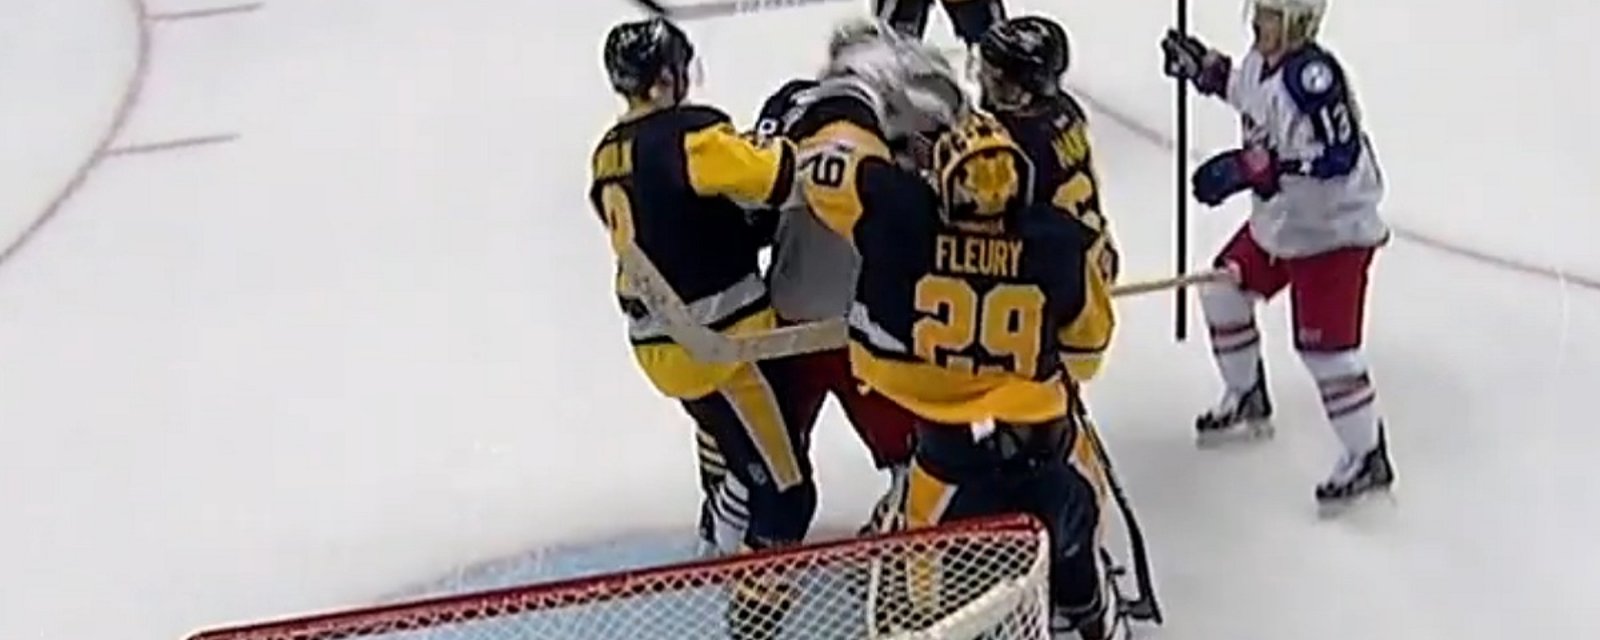 Fleury throws a punch after being slash in front of his net.